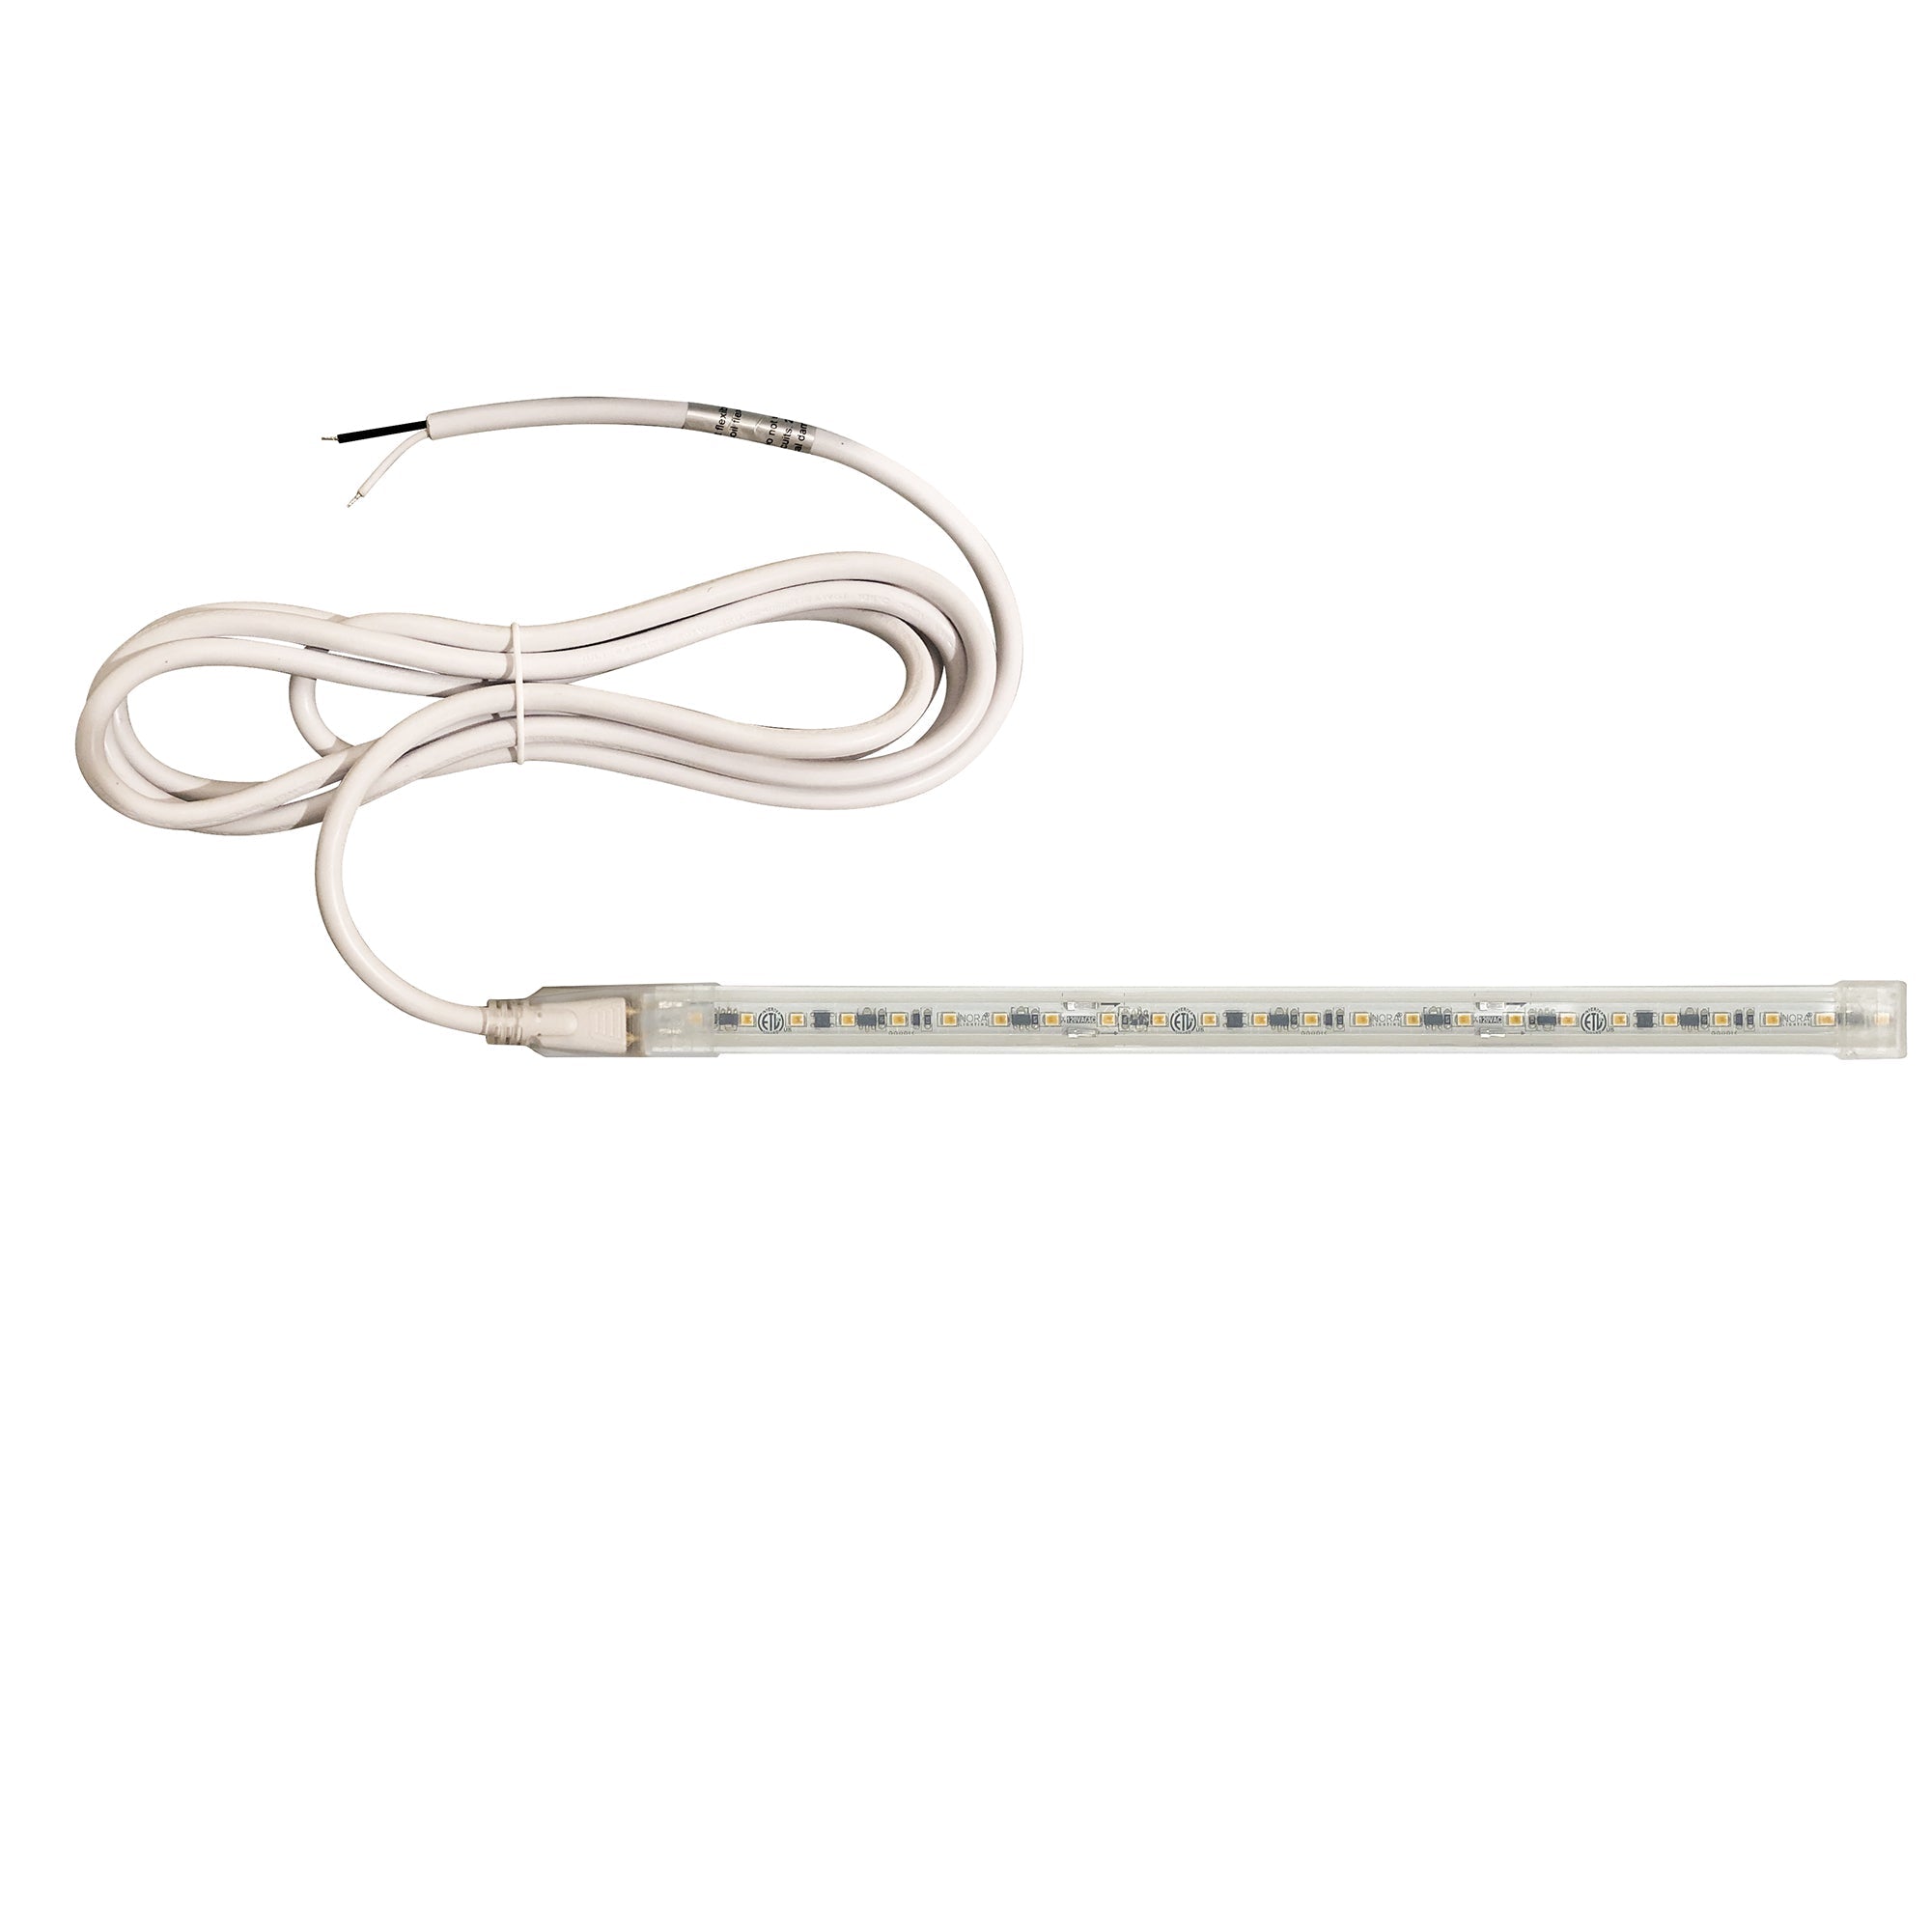 Nora Lighting NUTP13-W66-12-930/HW - Accent / Undercabinet - Custom Cut 66-ft 120V Continuous LED Tape Light, 330lm / 3.6W per foot, 3000K, w/ Mounting Clips and 8' Hardwired Power Cord